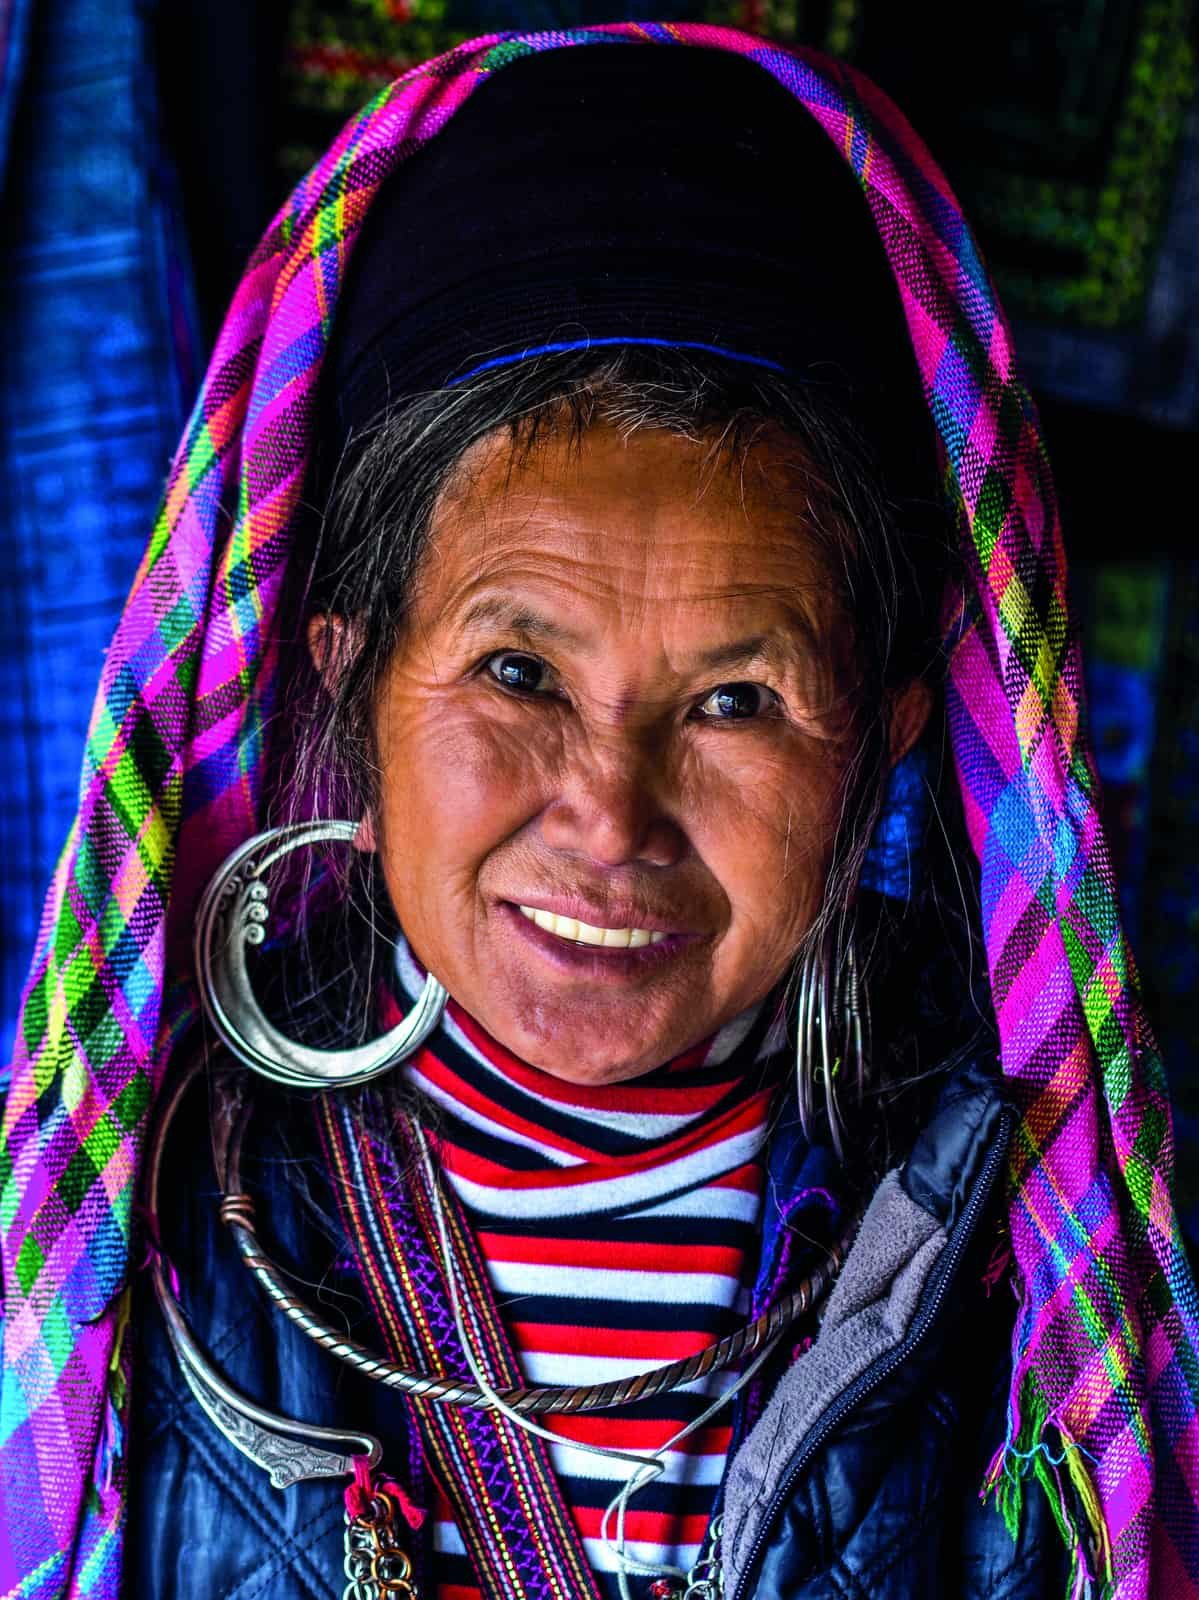 A woman with a vibrant soul, wearing a colorful scarf and hoop earrings, gracefully embodies the spirit of travel.